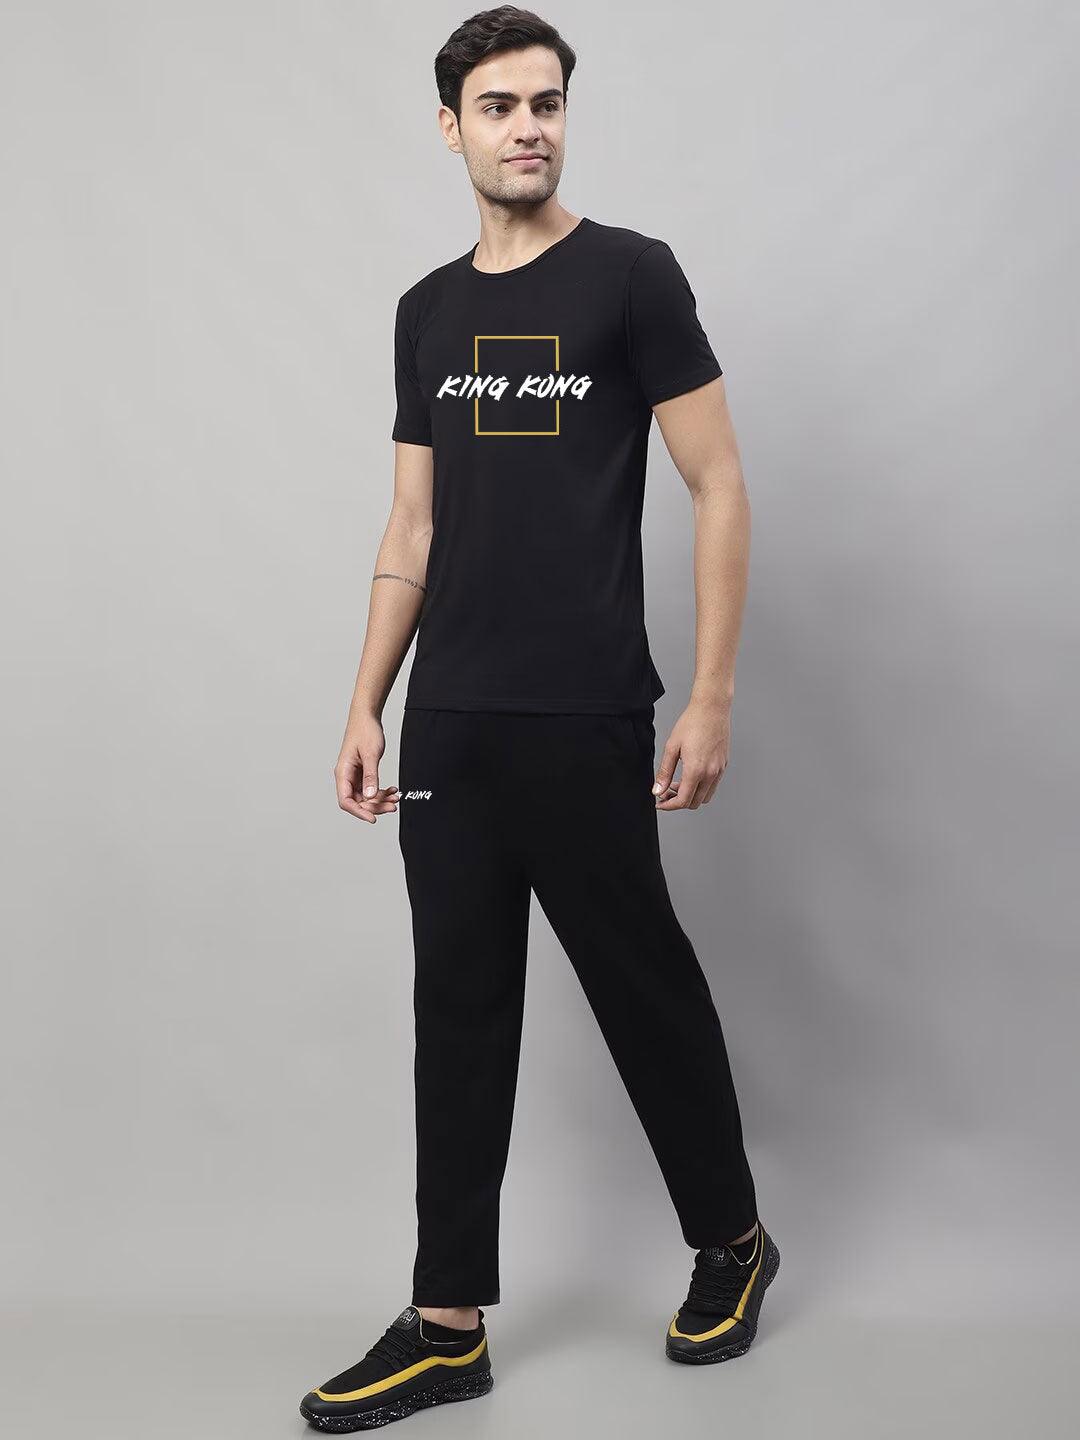 Mens Fitted Track Suits in Black Colour - Aadhitri